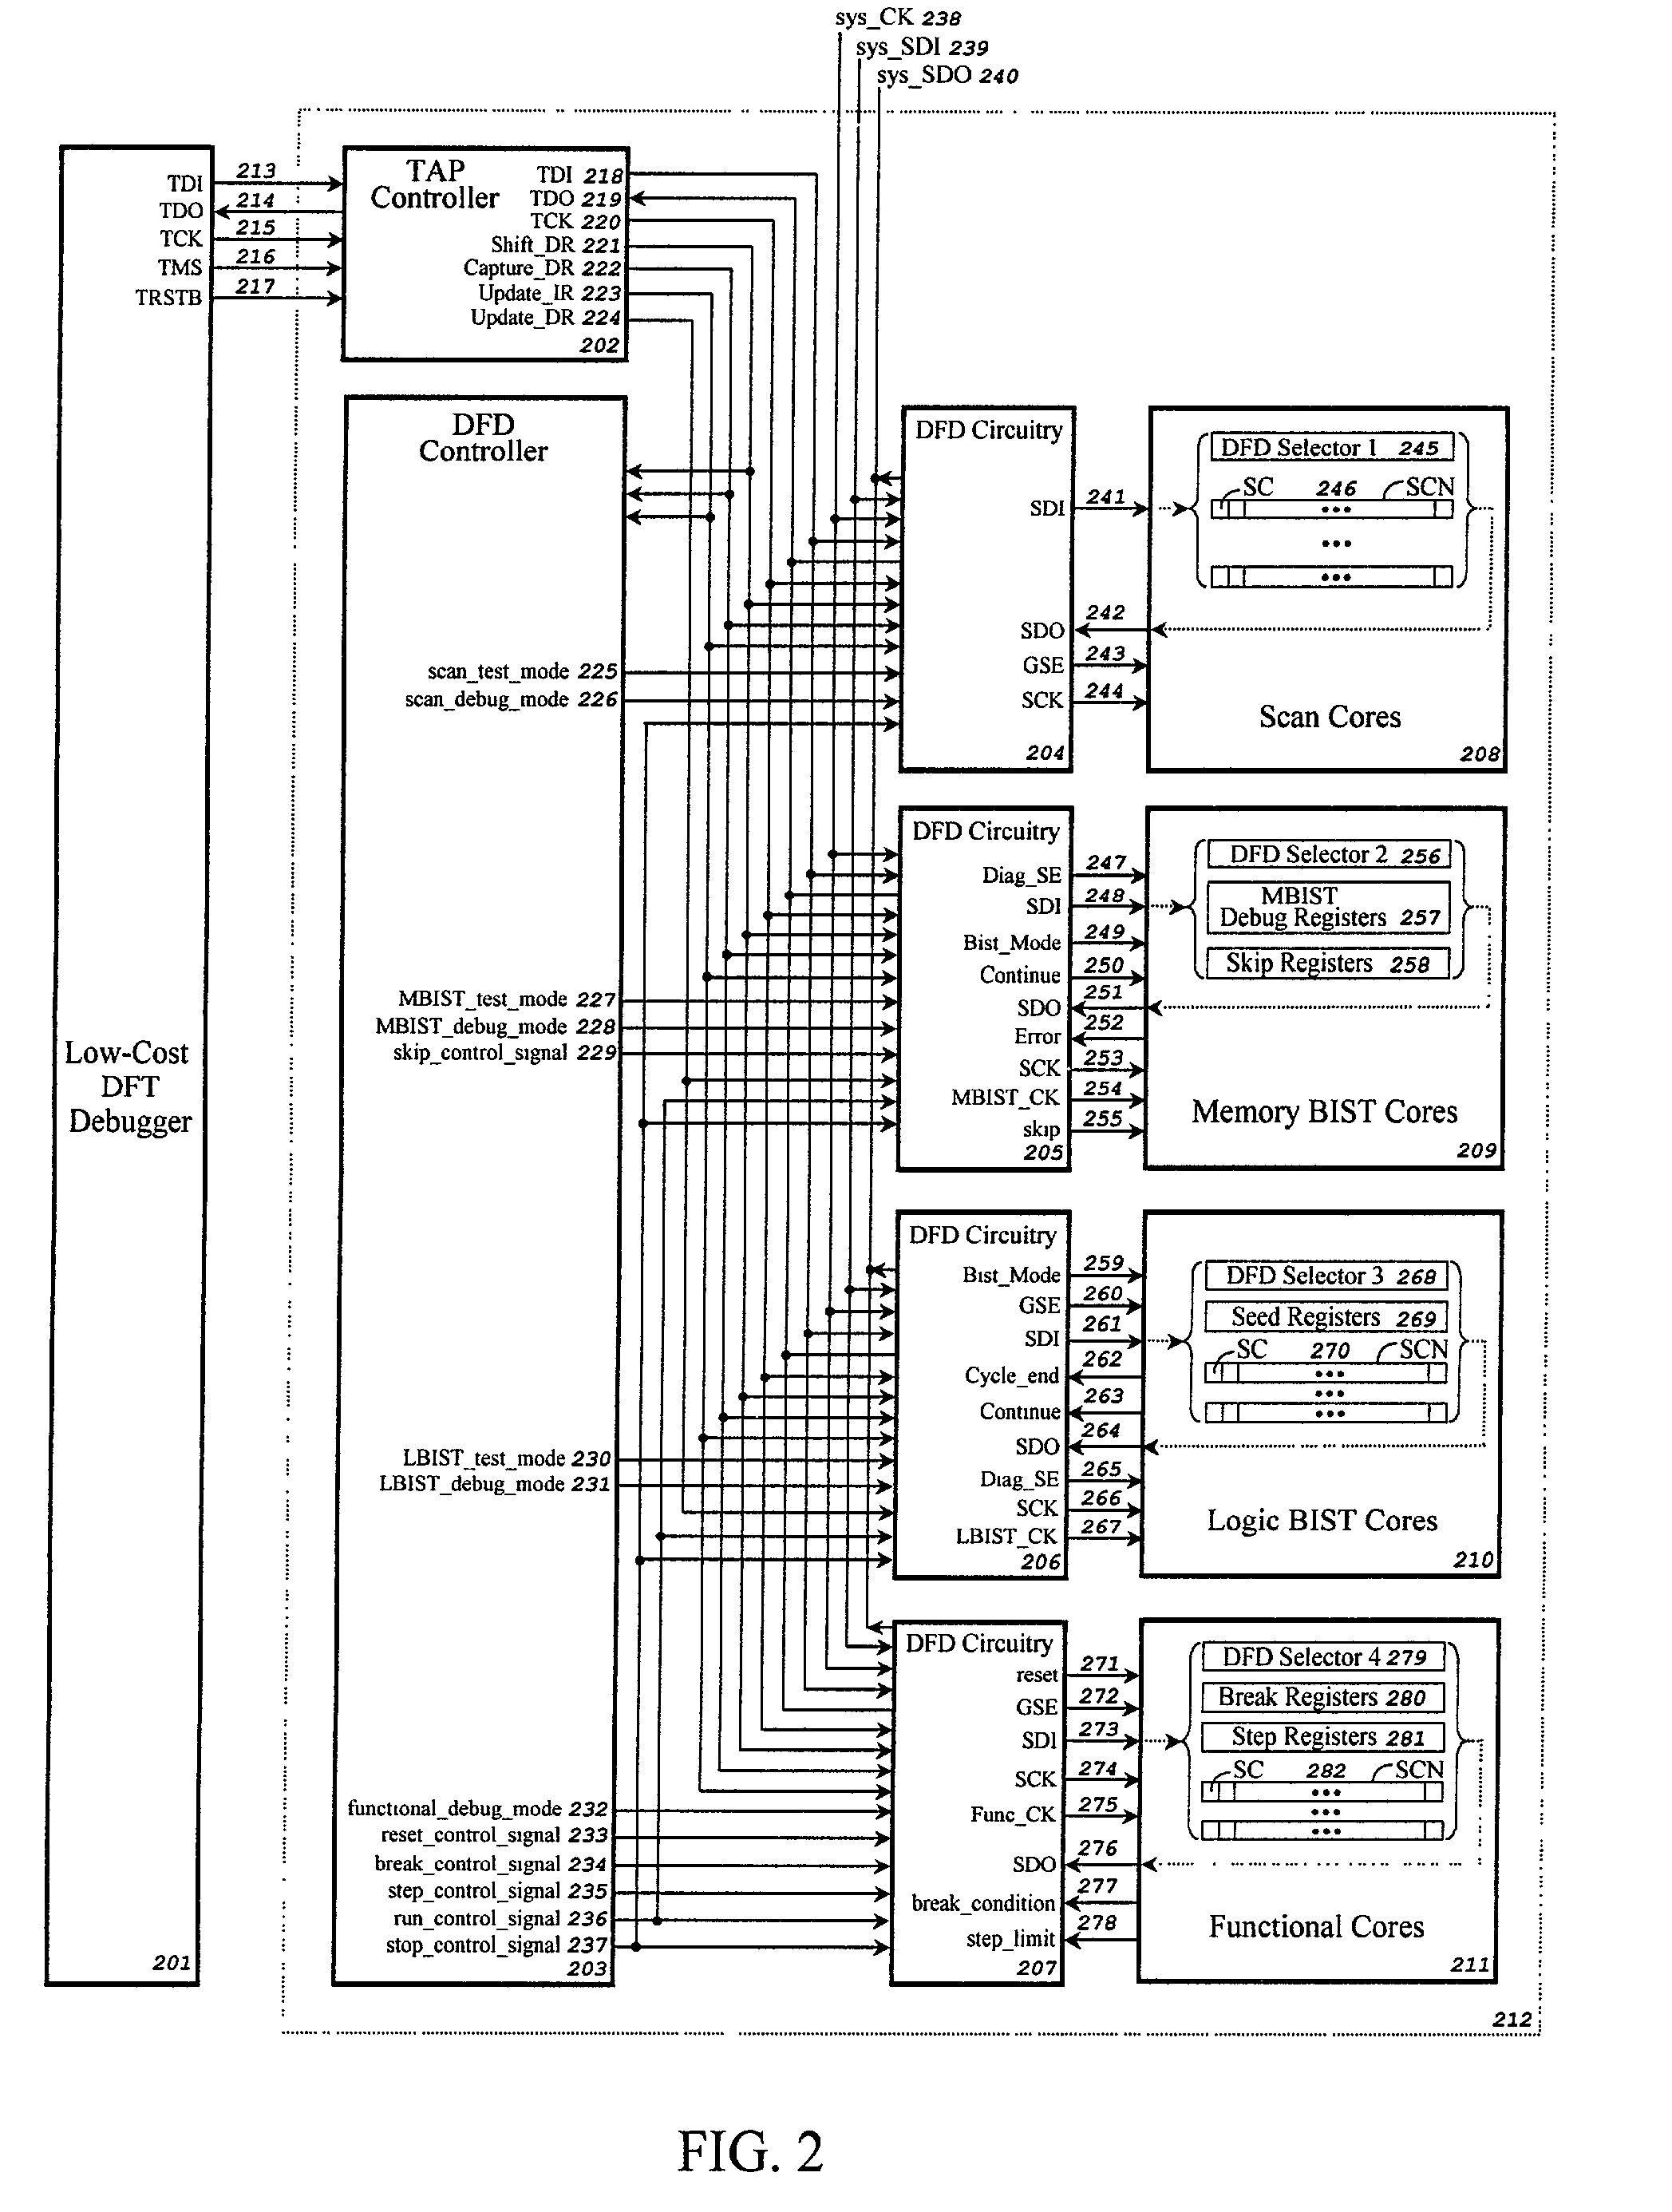 Method and apparatus for diagnosing failures in an integrated circuit using design-for-debug (DFD) techniques